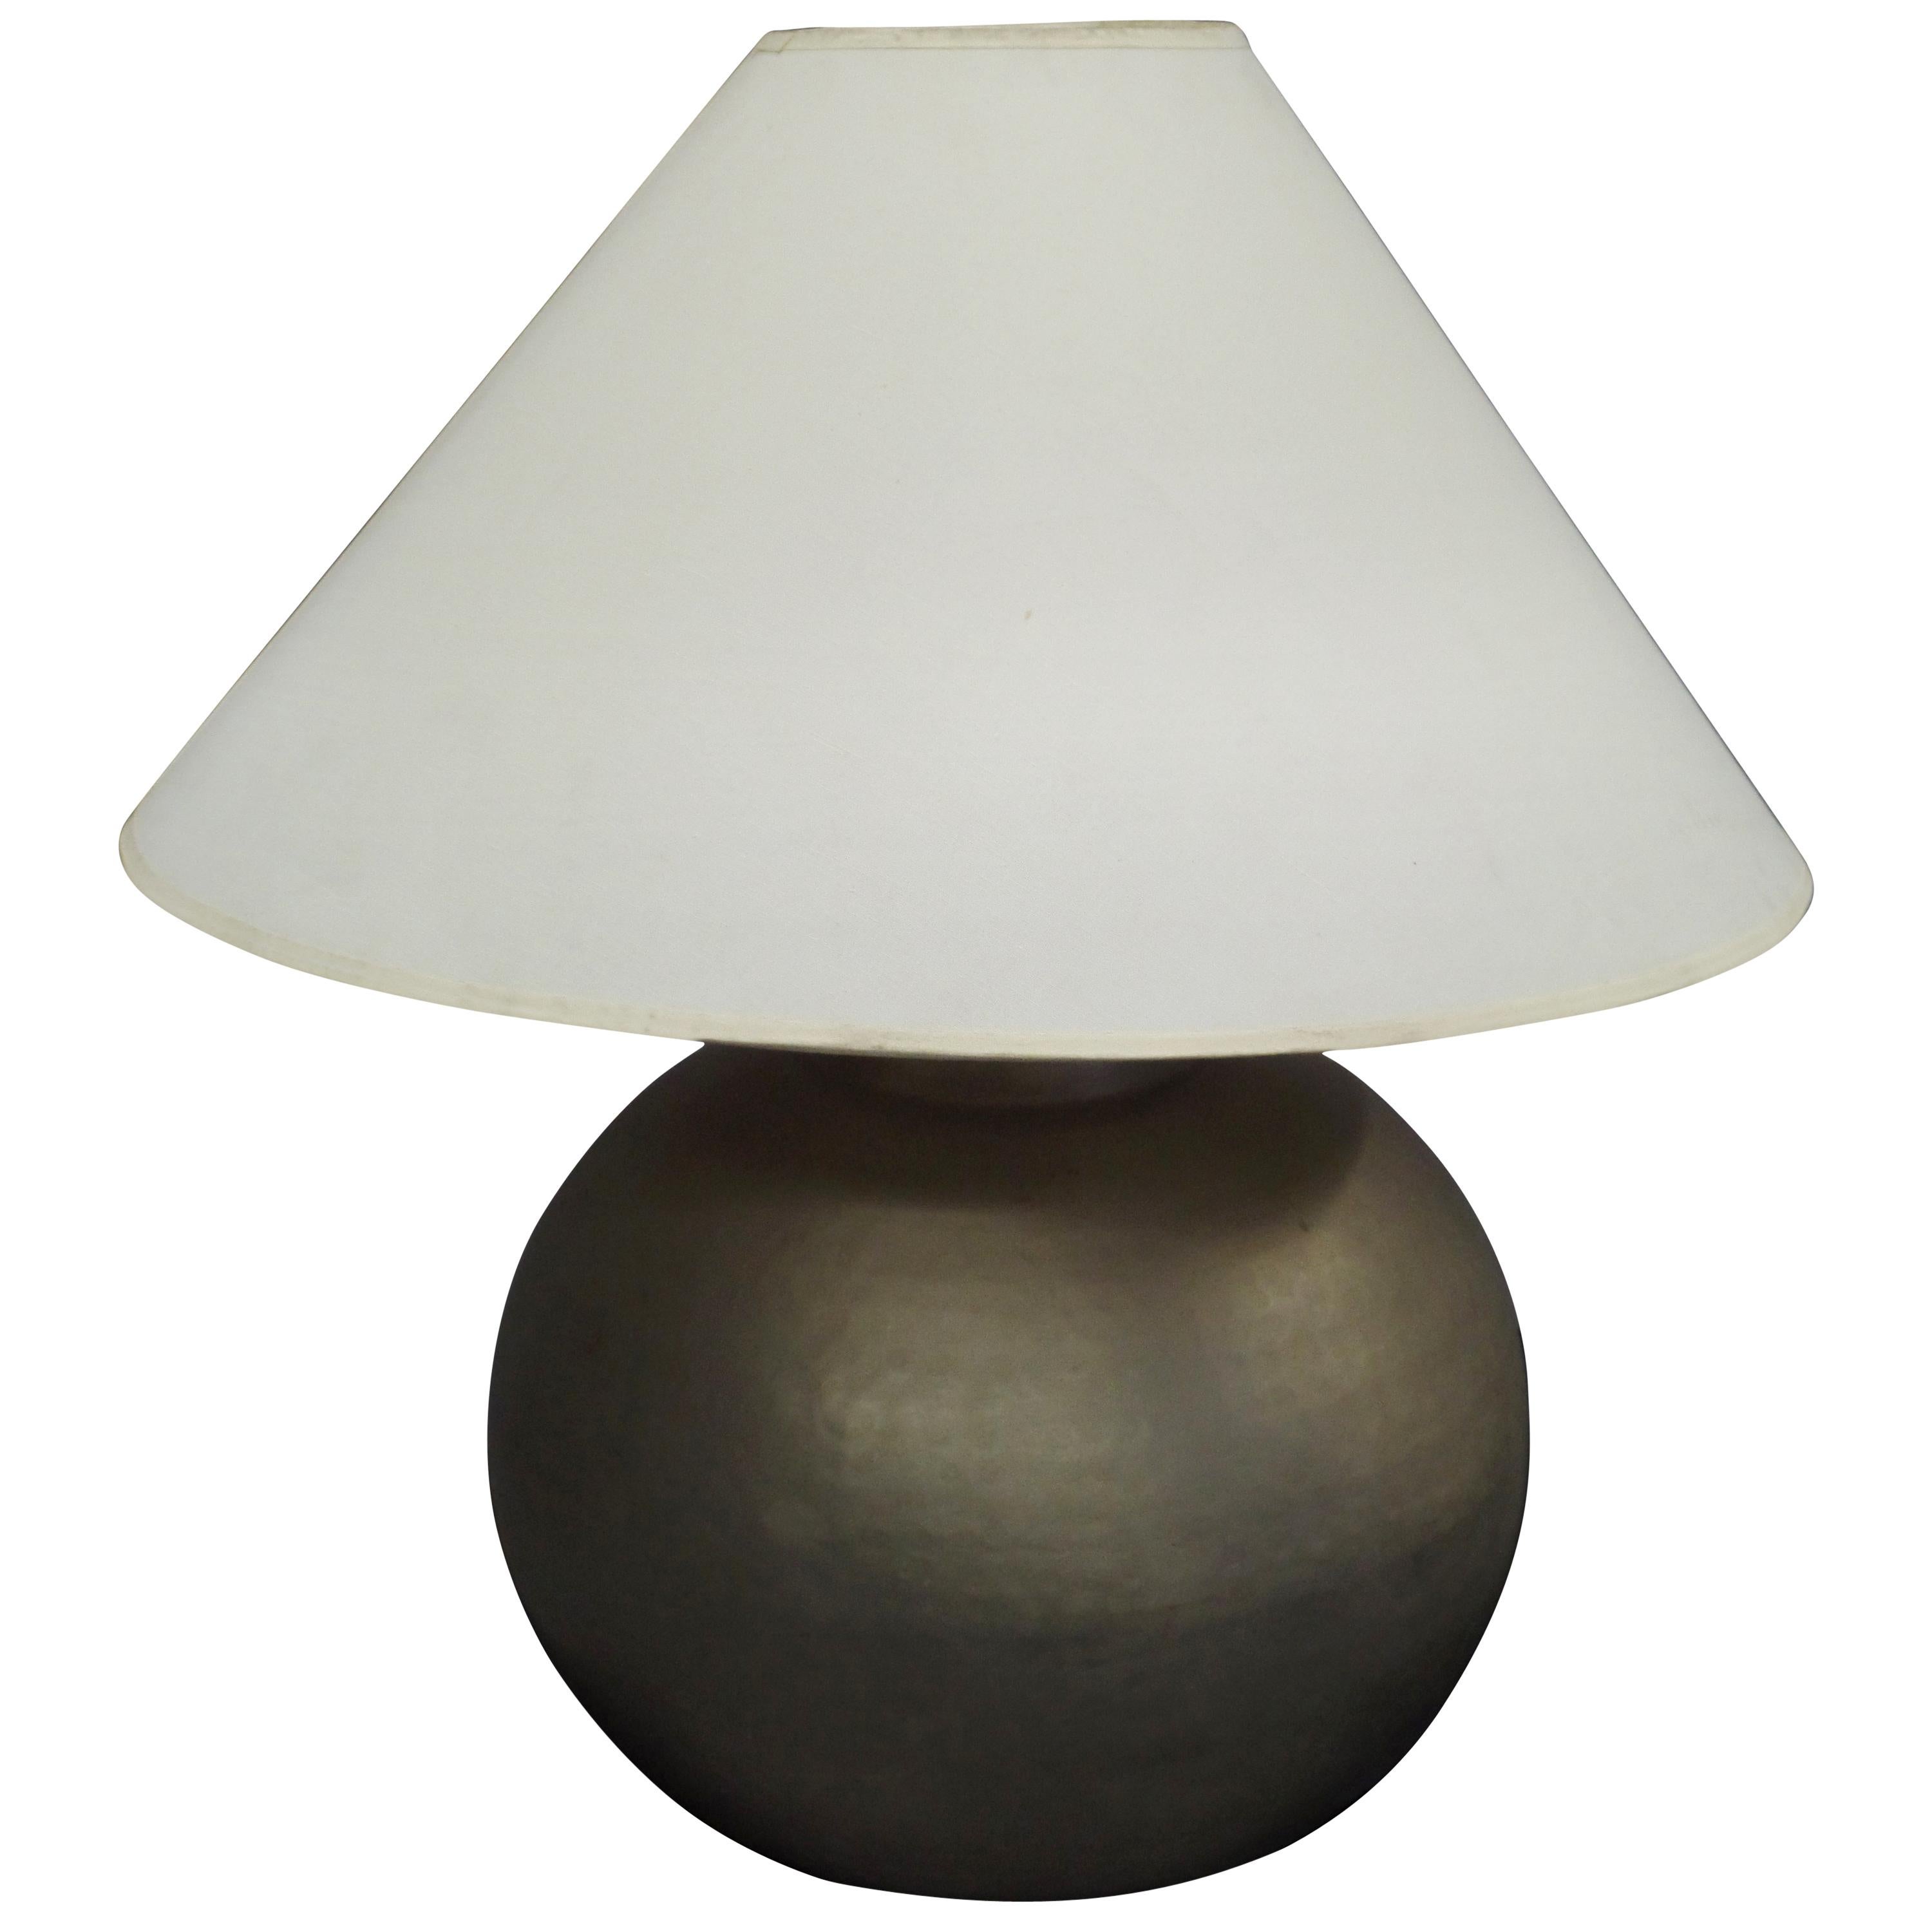 Elegant pair of French Midcentury Modern hand-hammered solid brass table lamps in the spirit of Jean-Michel Frank in a round / circular / globe form transmitting a sober, modern spirit. The pieces are finished in matte metal (possibly matte nickel)